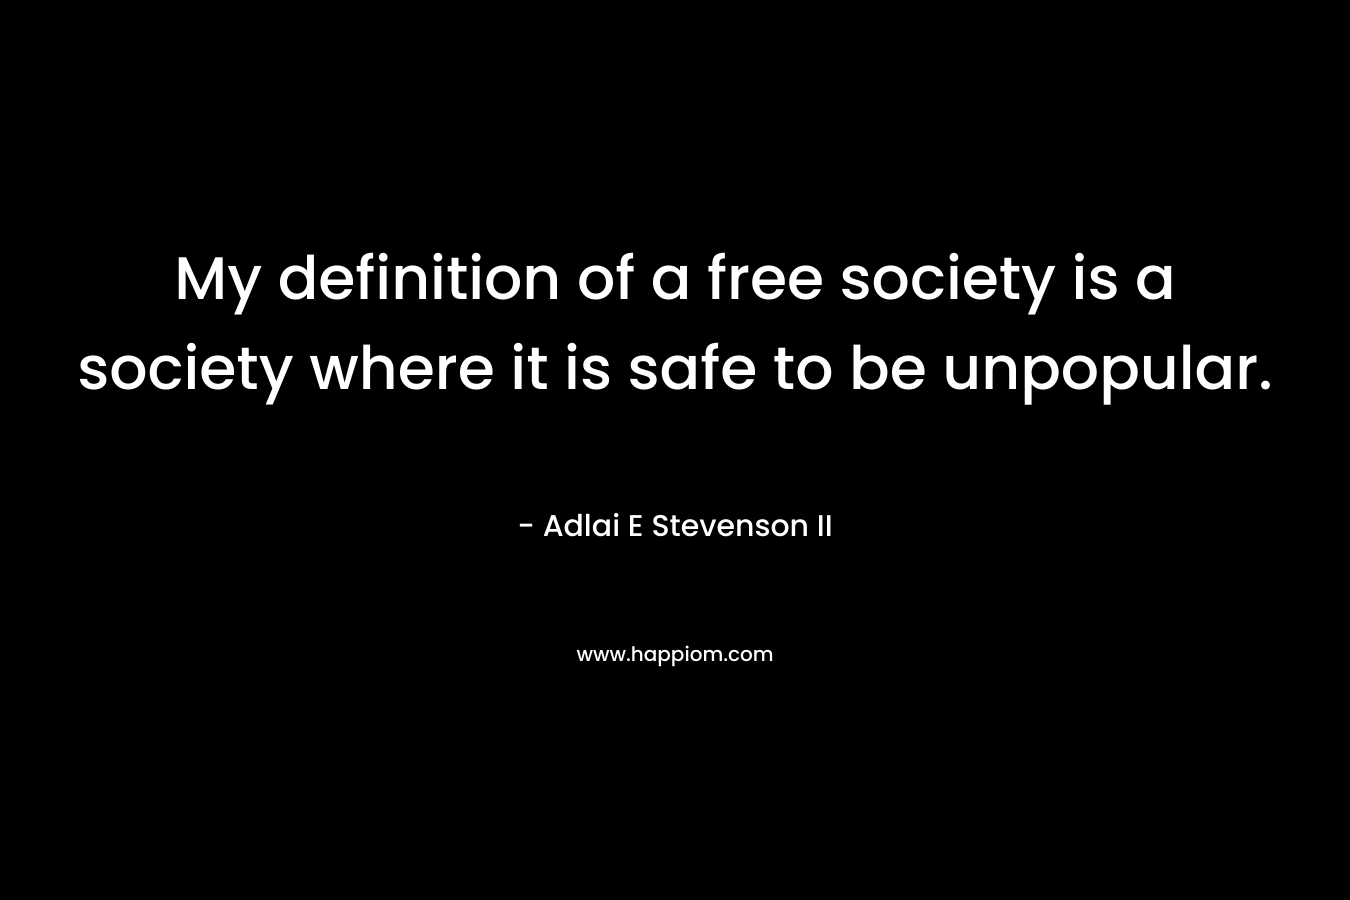 My definition of a free society is a society where it is safe to be unpopular. – Adlai E Stevenson II